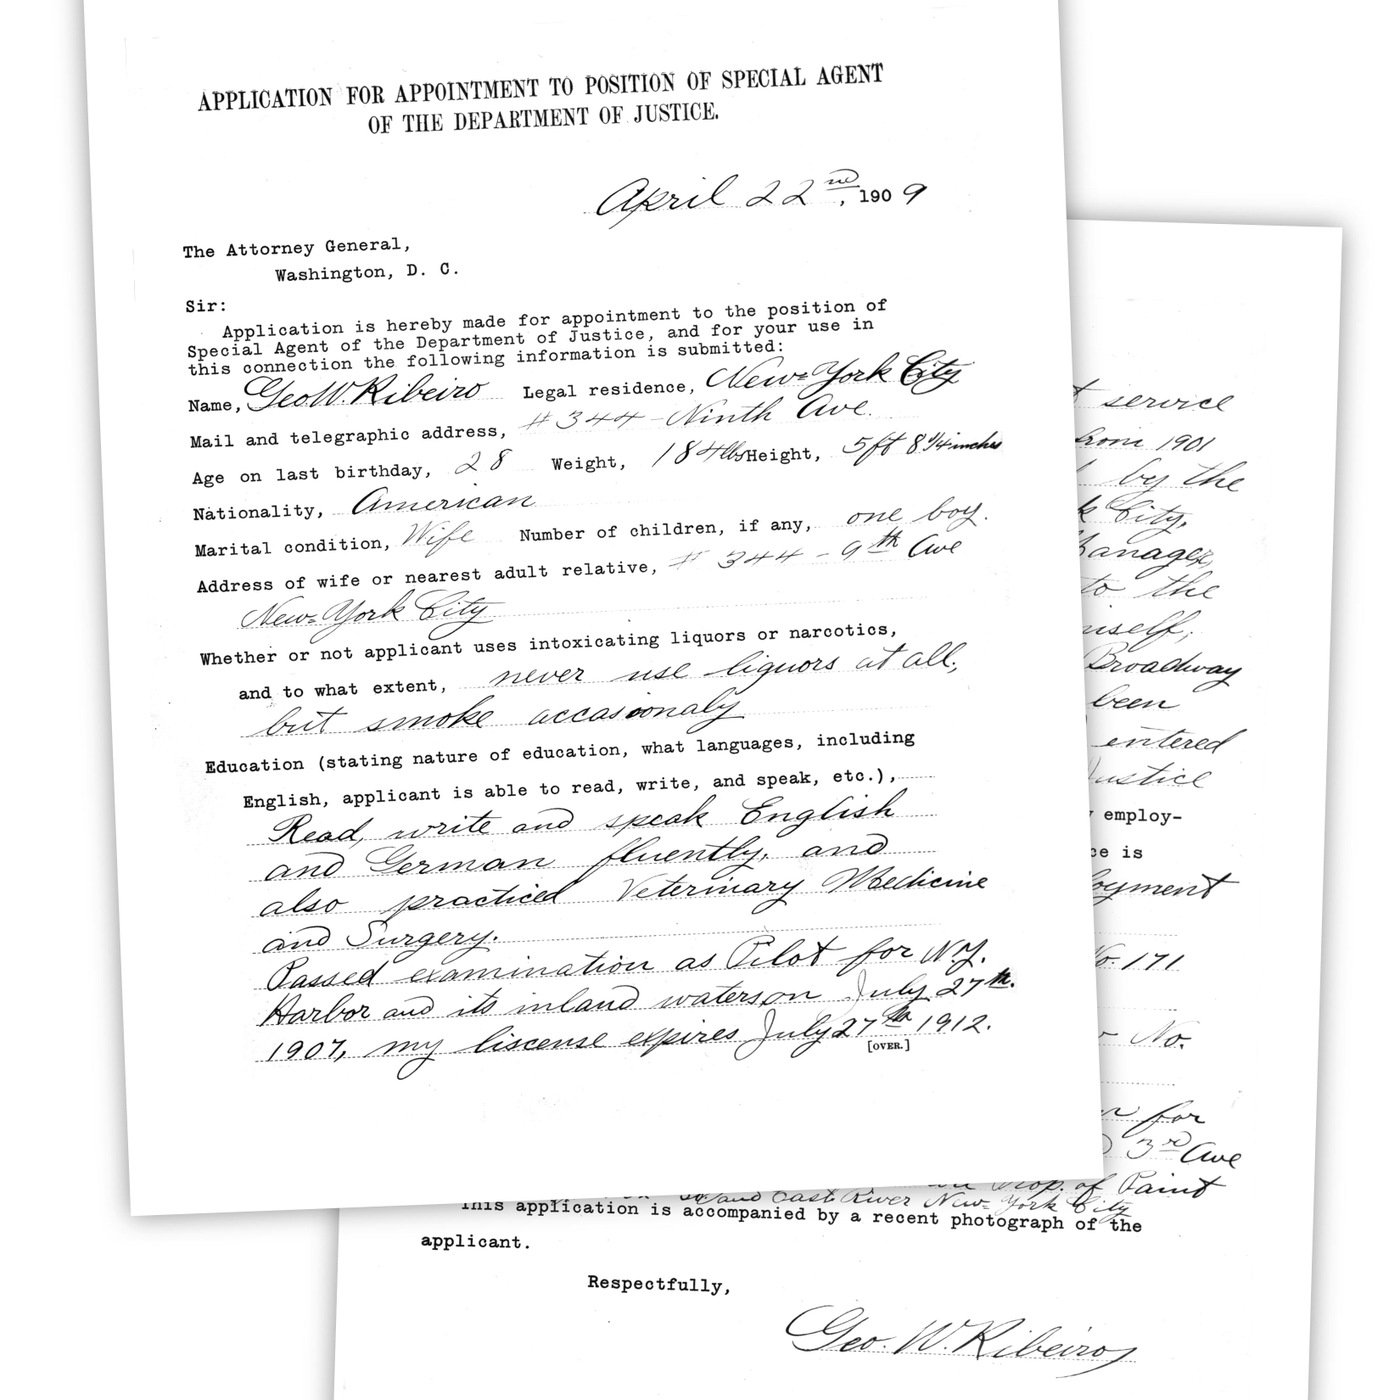 Earliest application for special agent position in the Department of Justice in 1909.